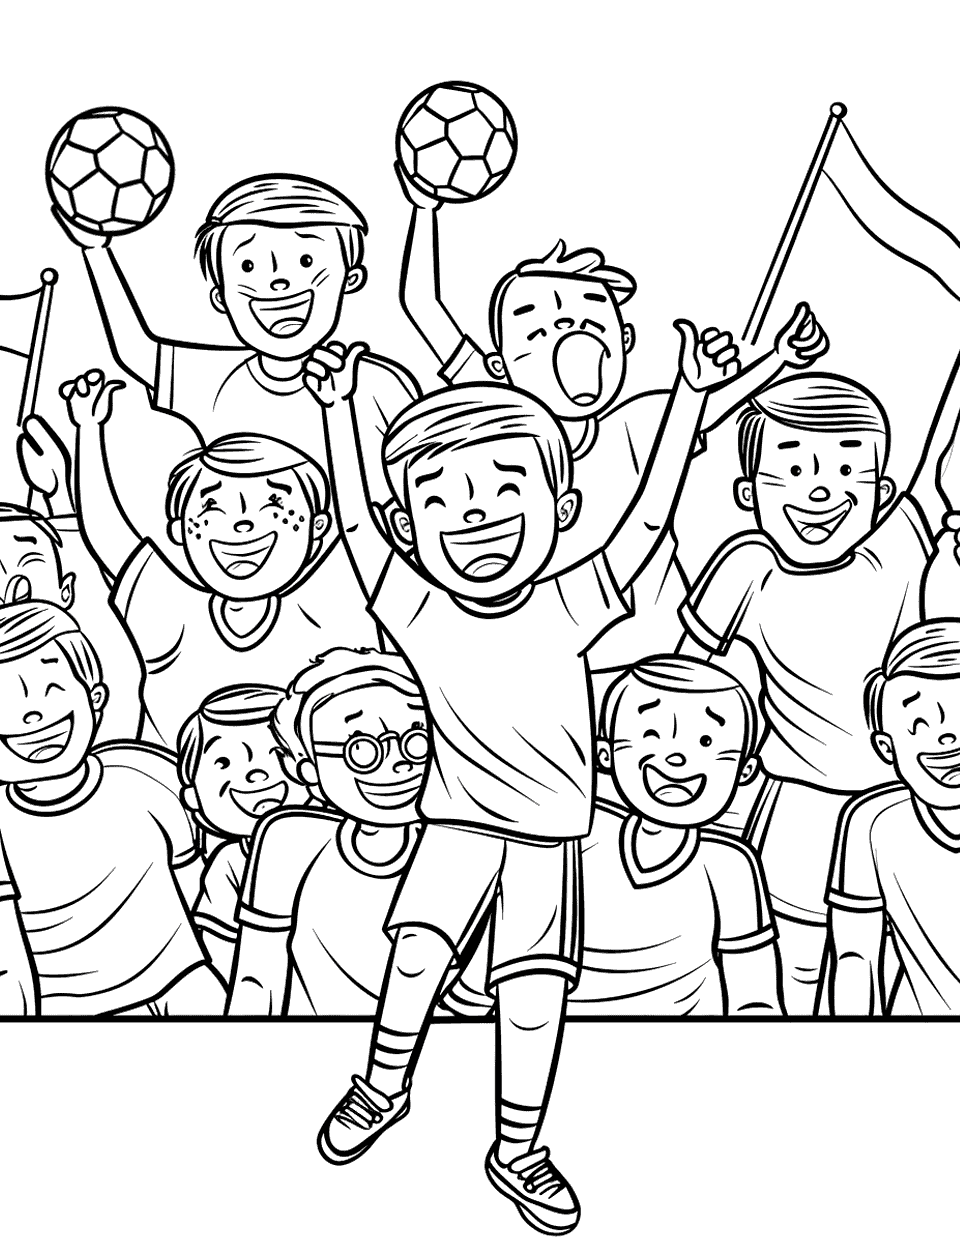 Excited Soccer Crowd Coloring Page - A crowd of soccer fans cheering loudly from the stands, some waving flags.